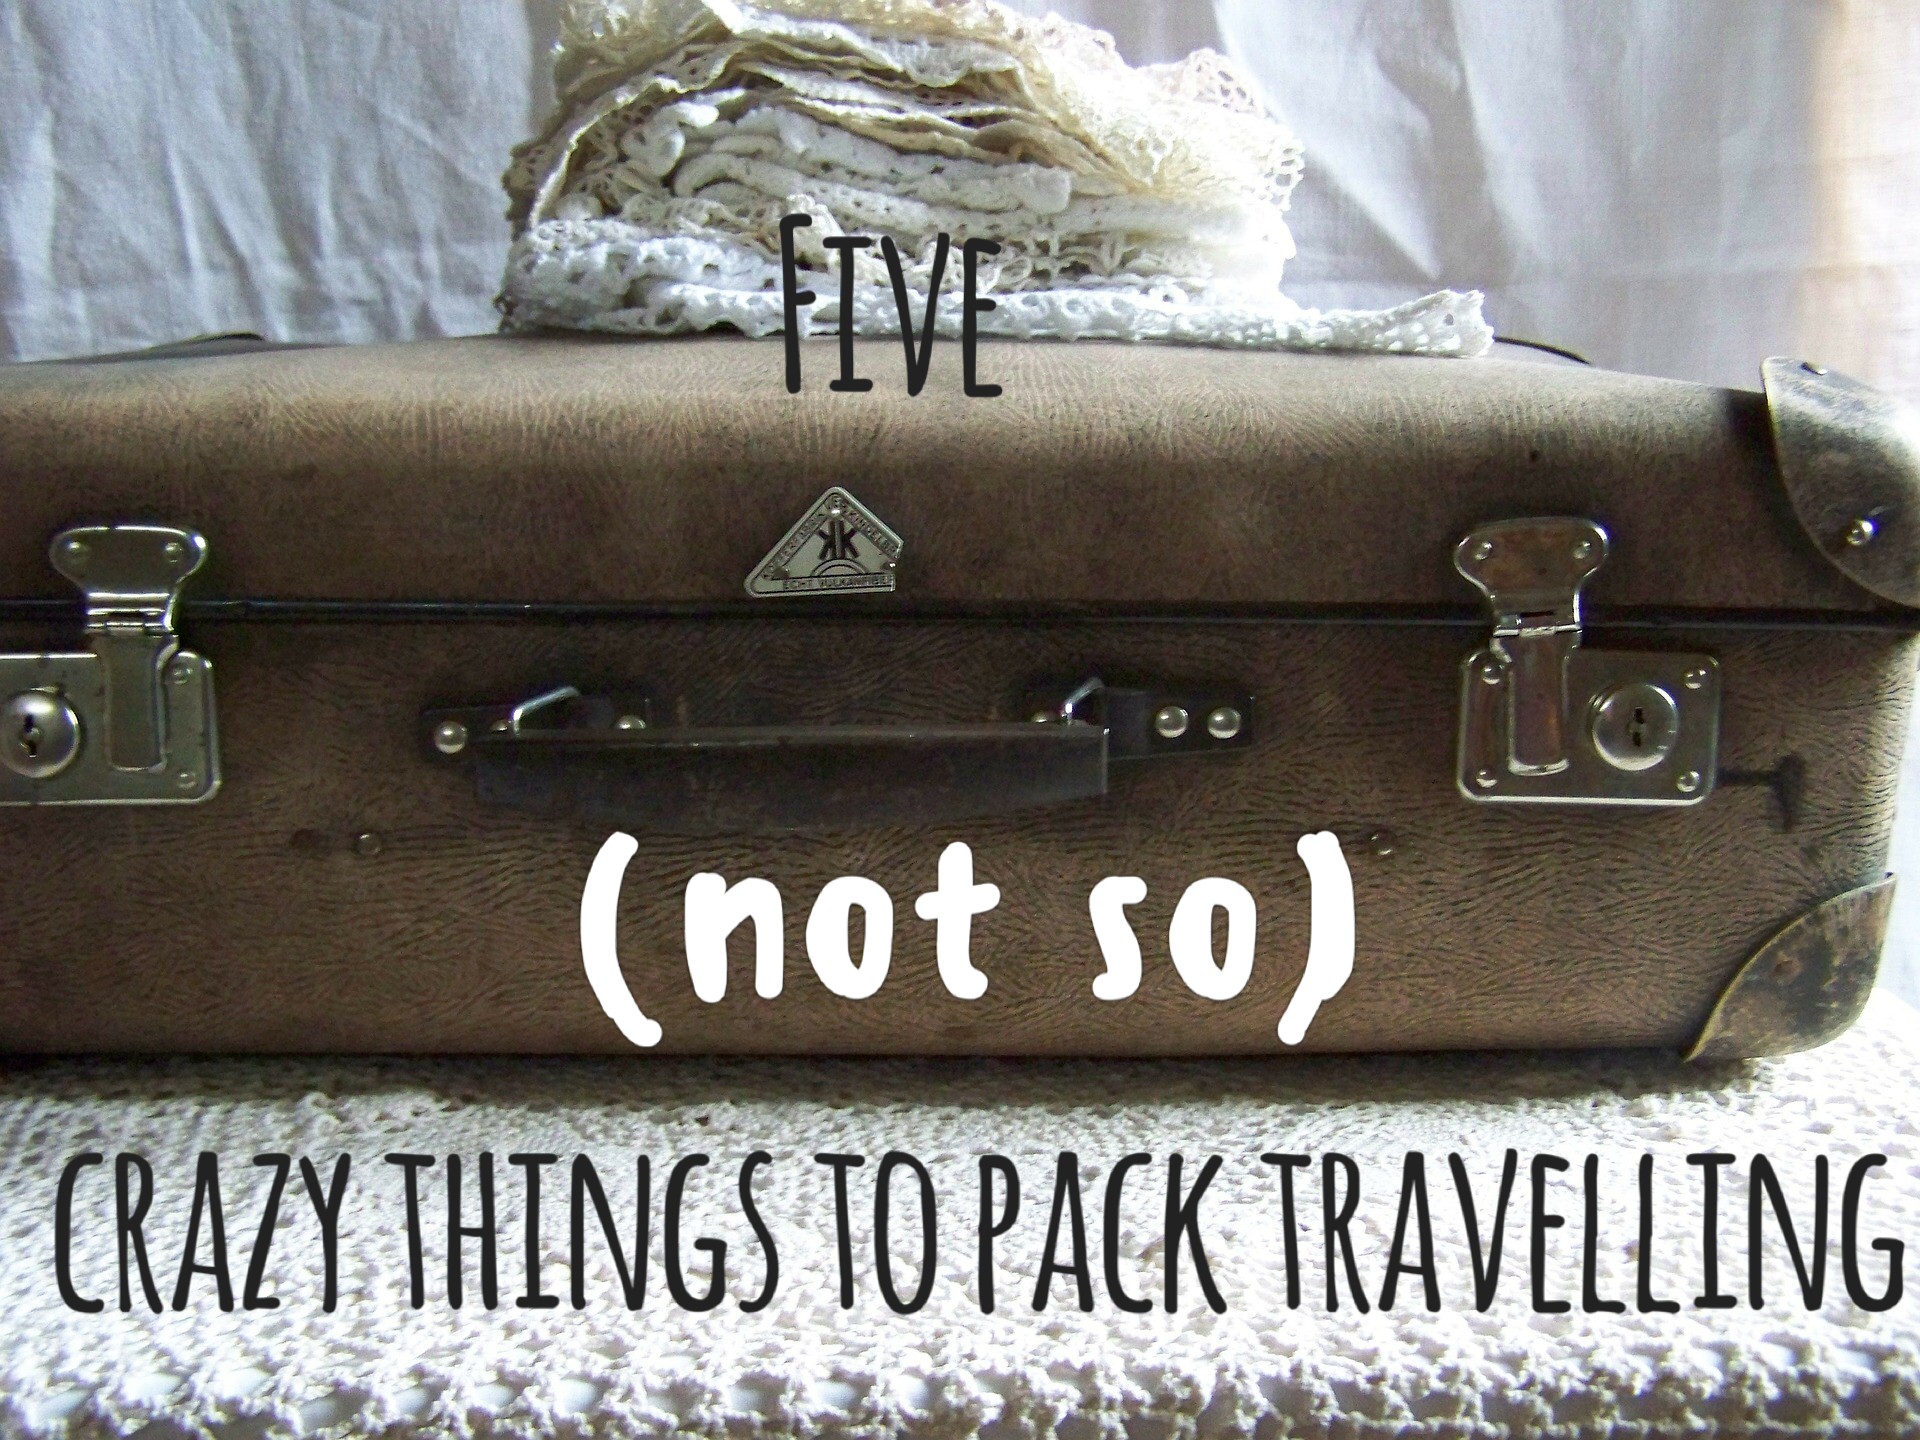 Suitcase: 5 crazy things to pack while travelling